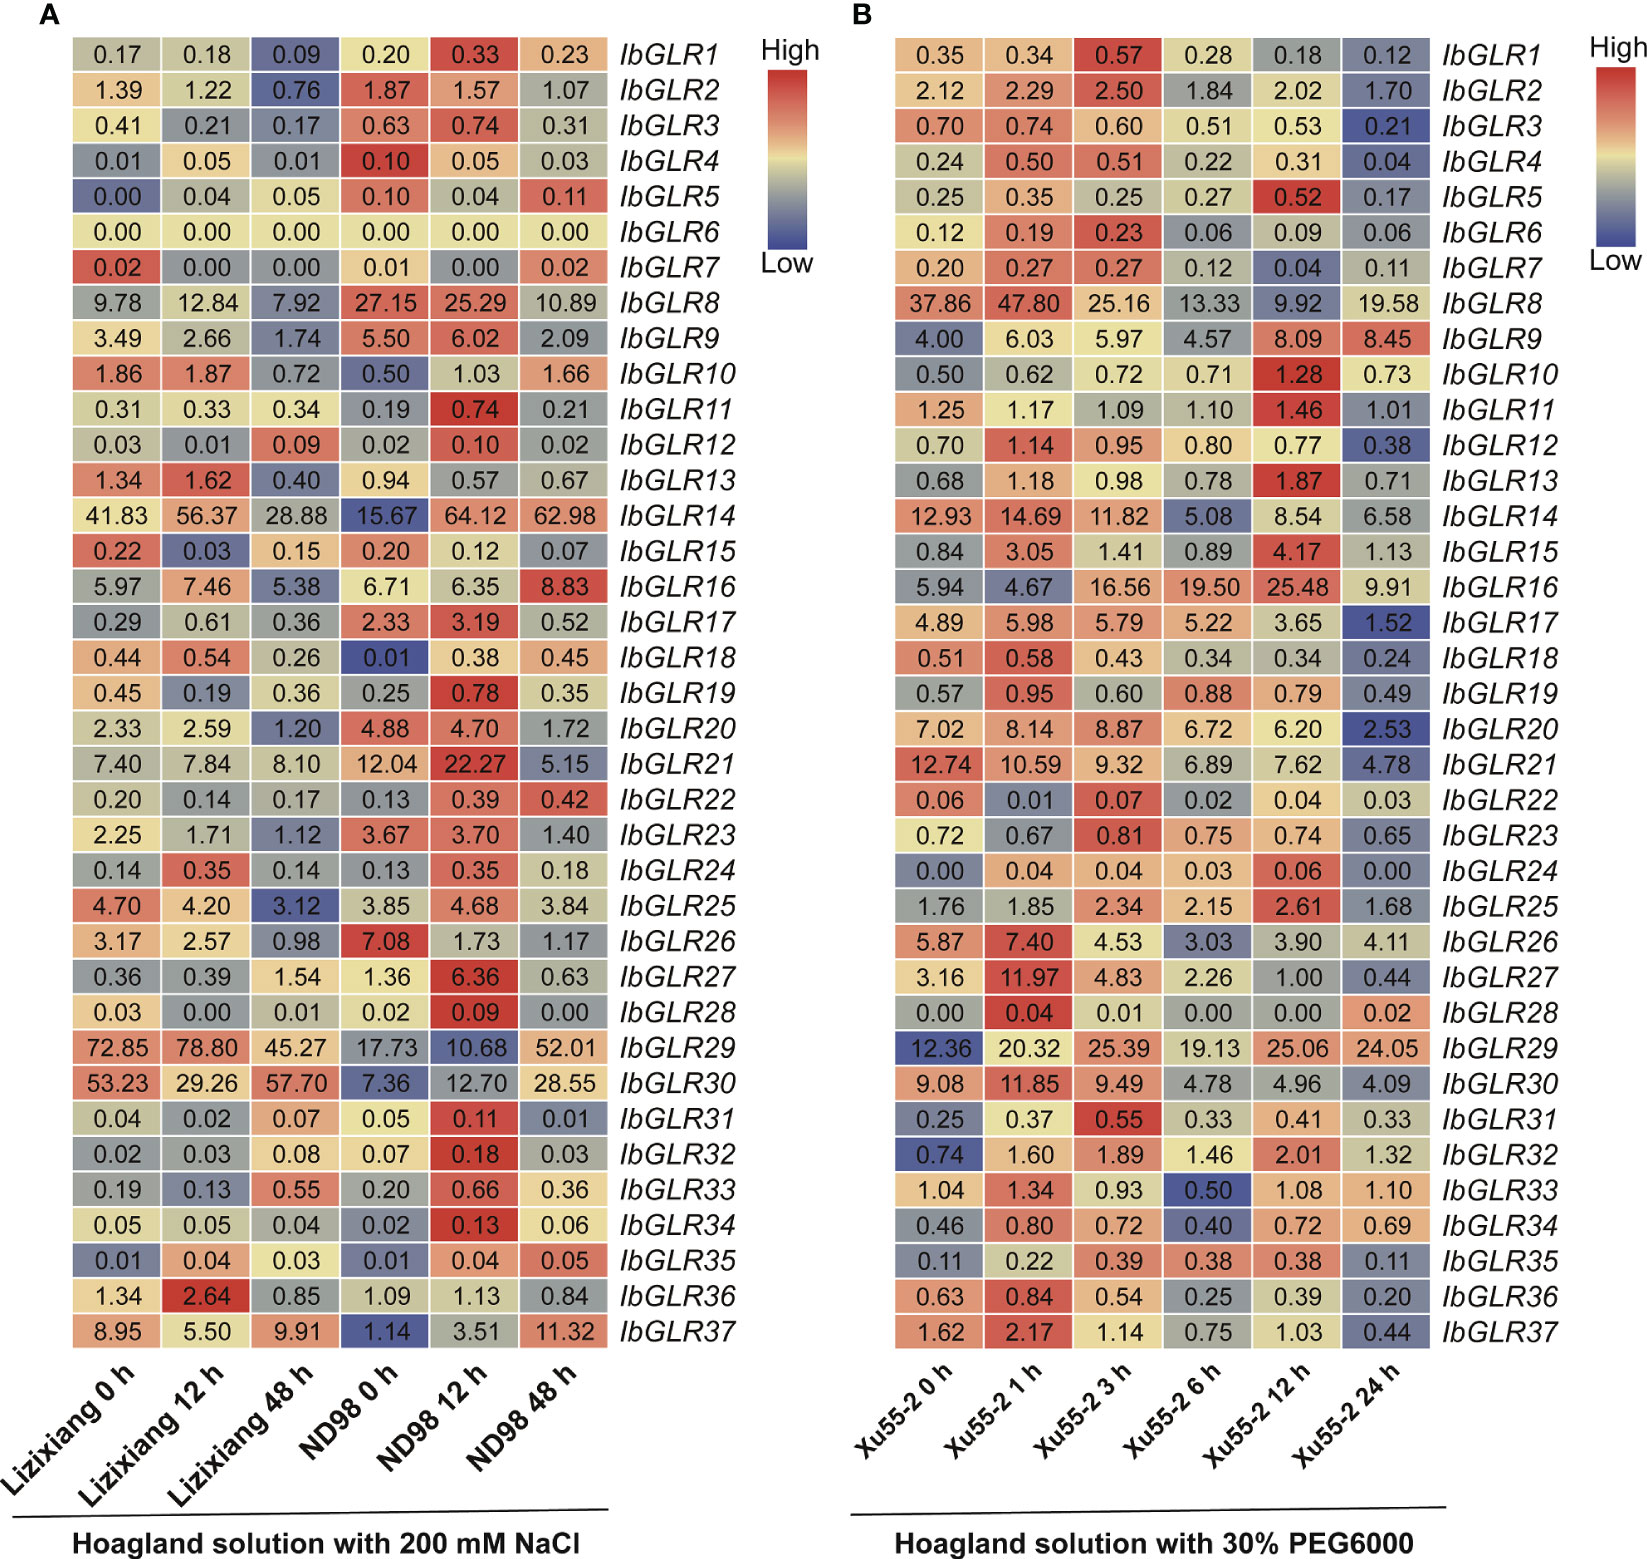 Frontiers | Genome-wide identification and expression analysis of 